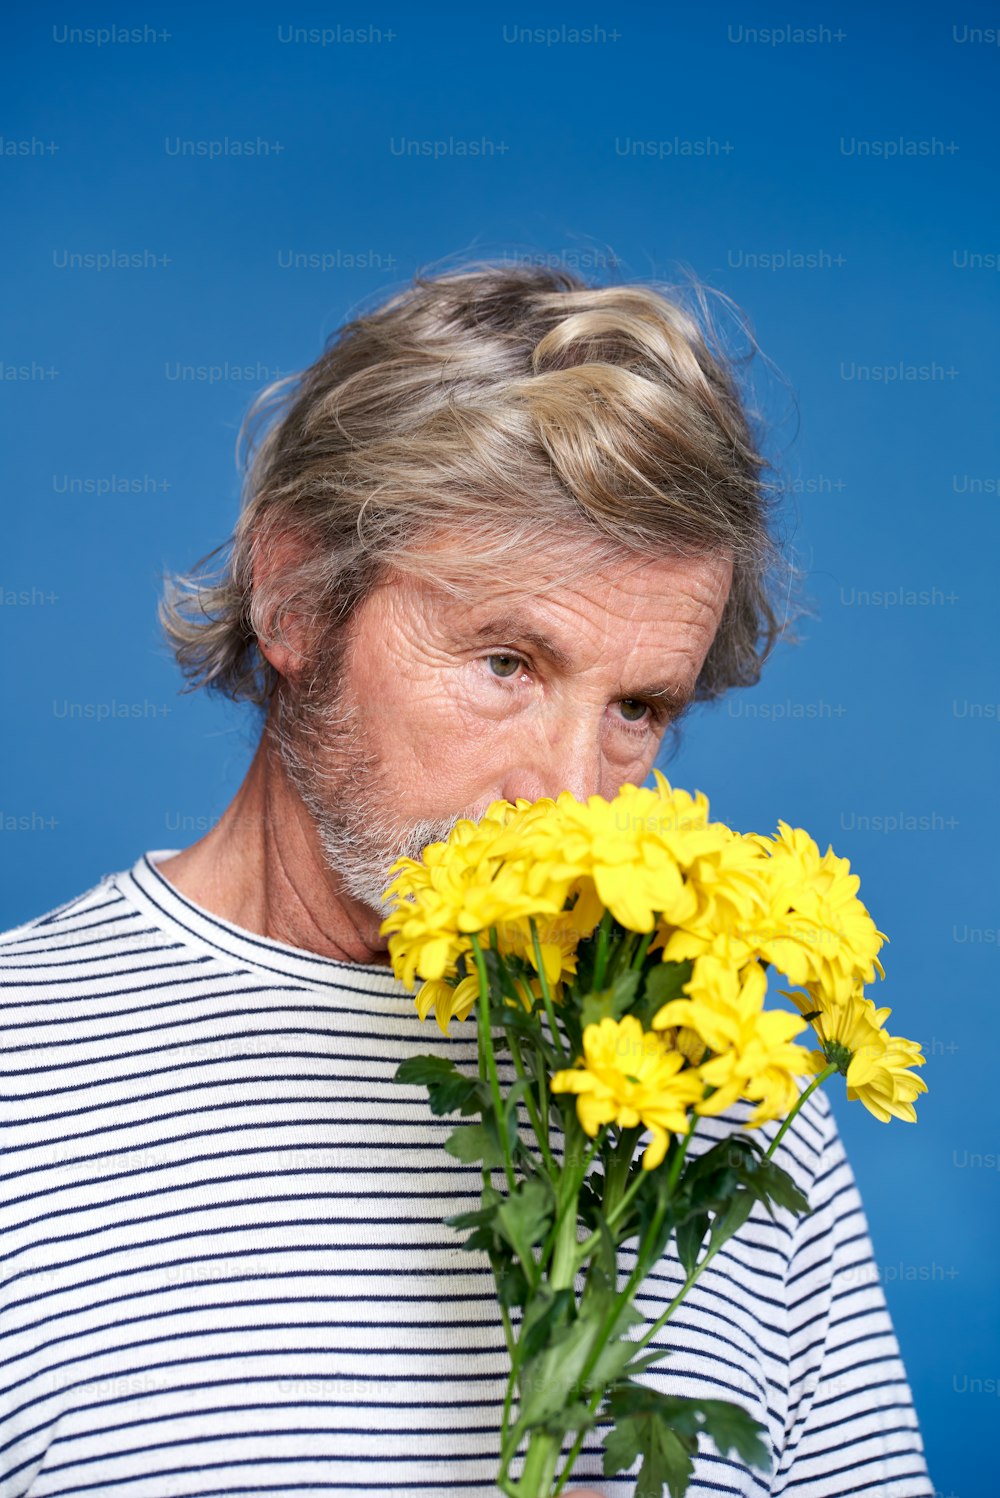 a man holding a bouquet of yellow flowers